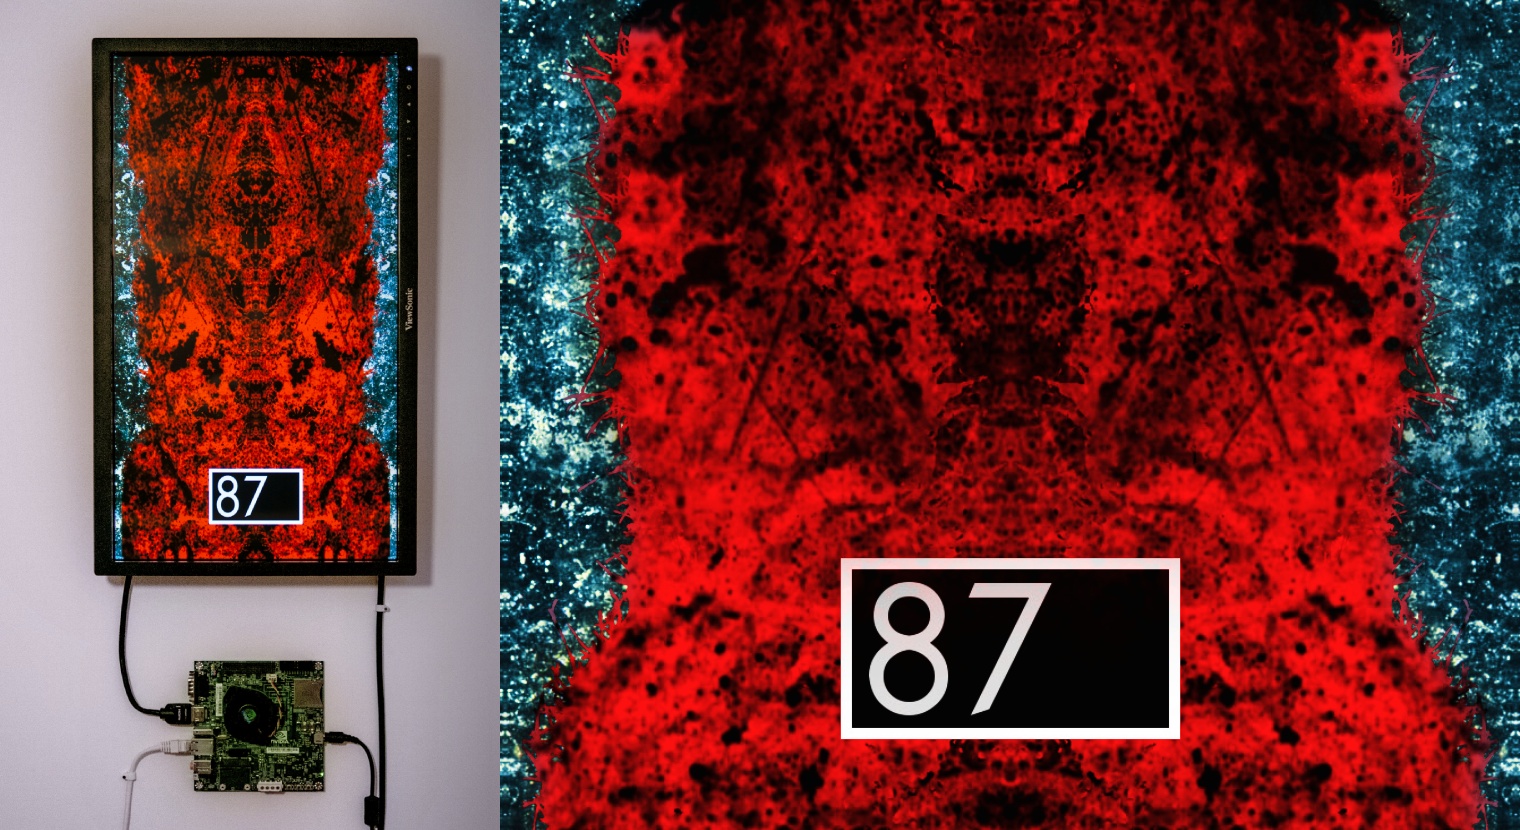 A double panel image, with a photograph of a wall-mounted screen with a blood red visualization (left) and a close-up screenshot of the visualization (right). The visualization is a stylized flat graphic with dynamic splotches of red and black color travelling vertically through a stone-like artery. The screens both also show the same number '87' as an overlay to the visualization.